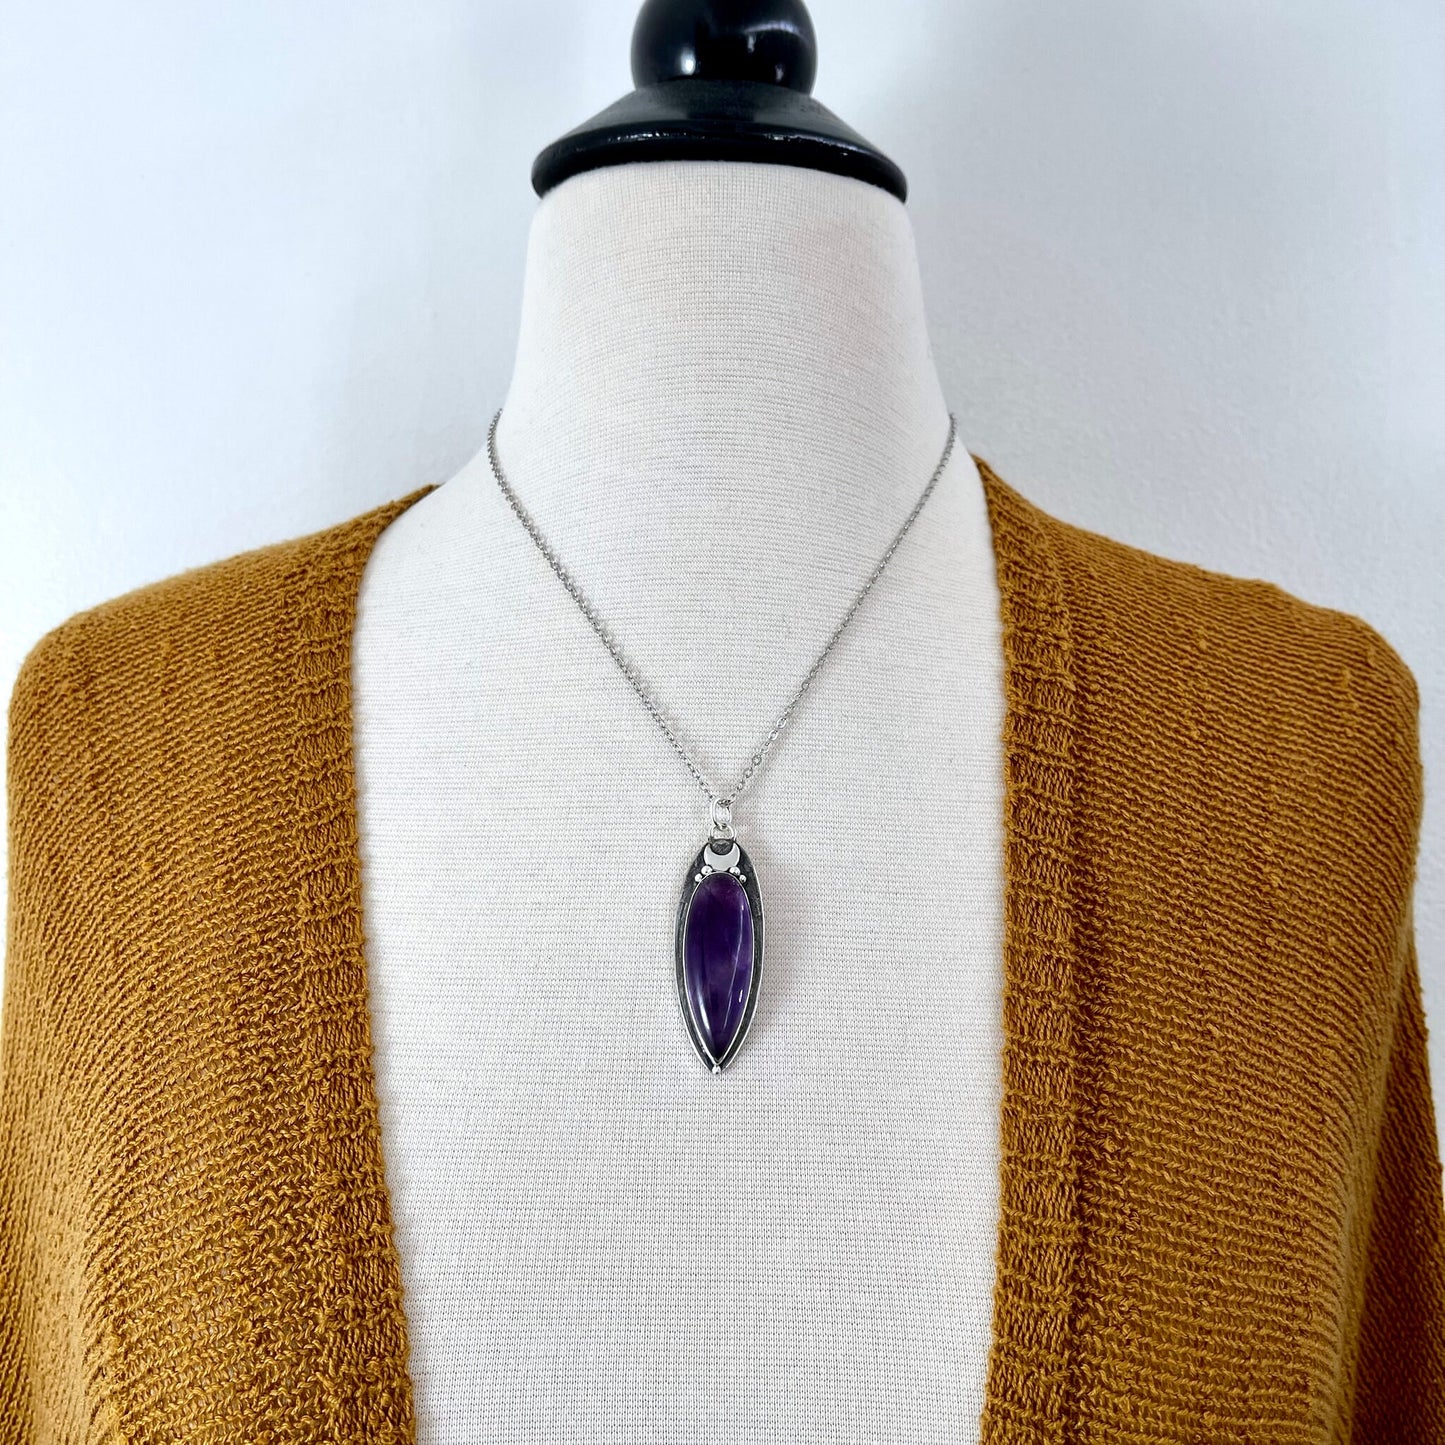 Magic Moon Amethyst Crystal Statement Necklace in Sterling Silver-Designed by FOXLARK Collection - Foxlark Crystal Jewelry